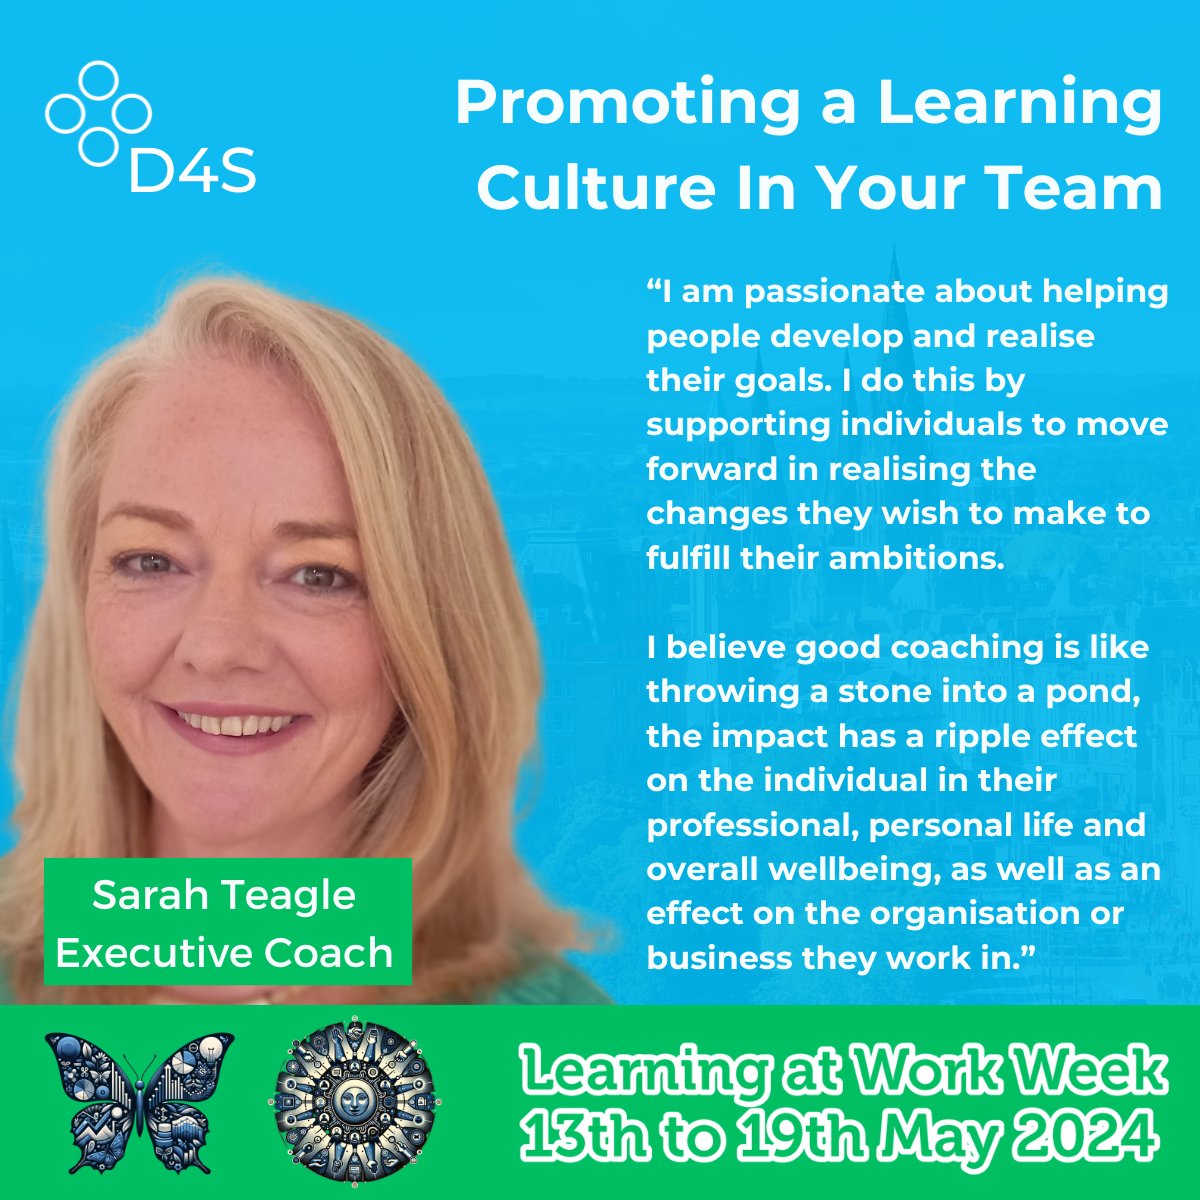 ⏰ The countdown is on - Just over one week until #LearningatWorkWeek starts. 😍

Intrigued to learn how embracing a learning culture can result in better engagement, motivation and productivity for your whole team?

Explore more here:

designed4success.co.uk/event-details/…